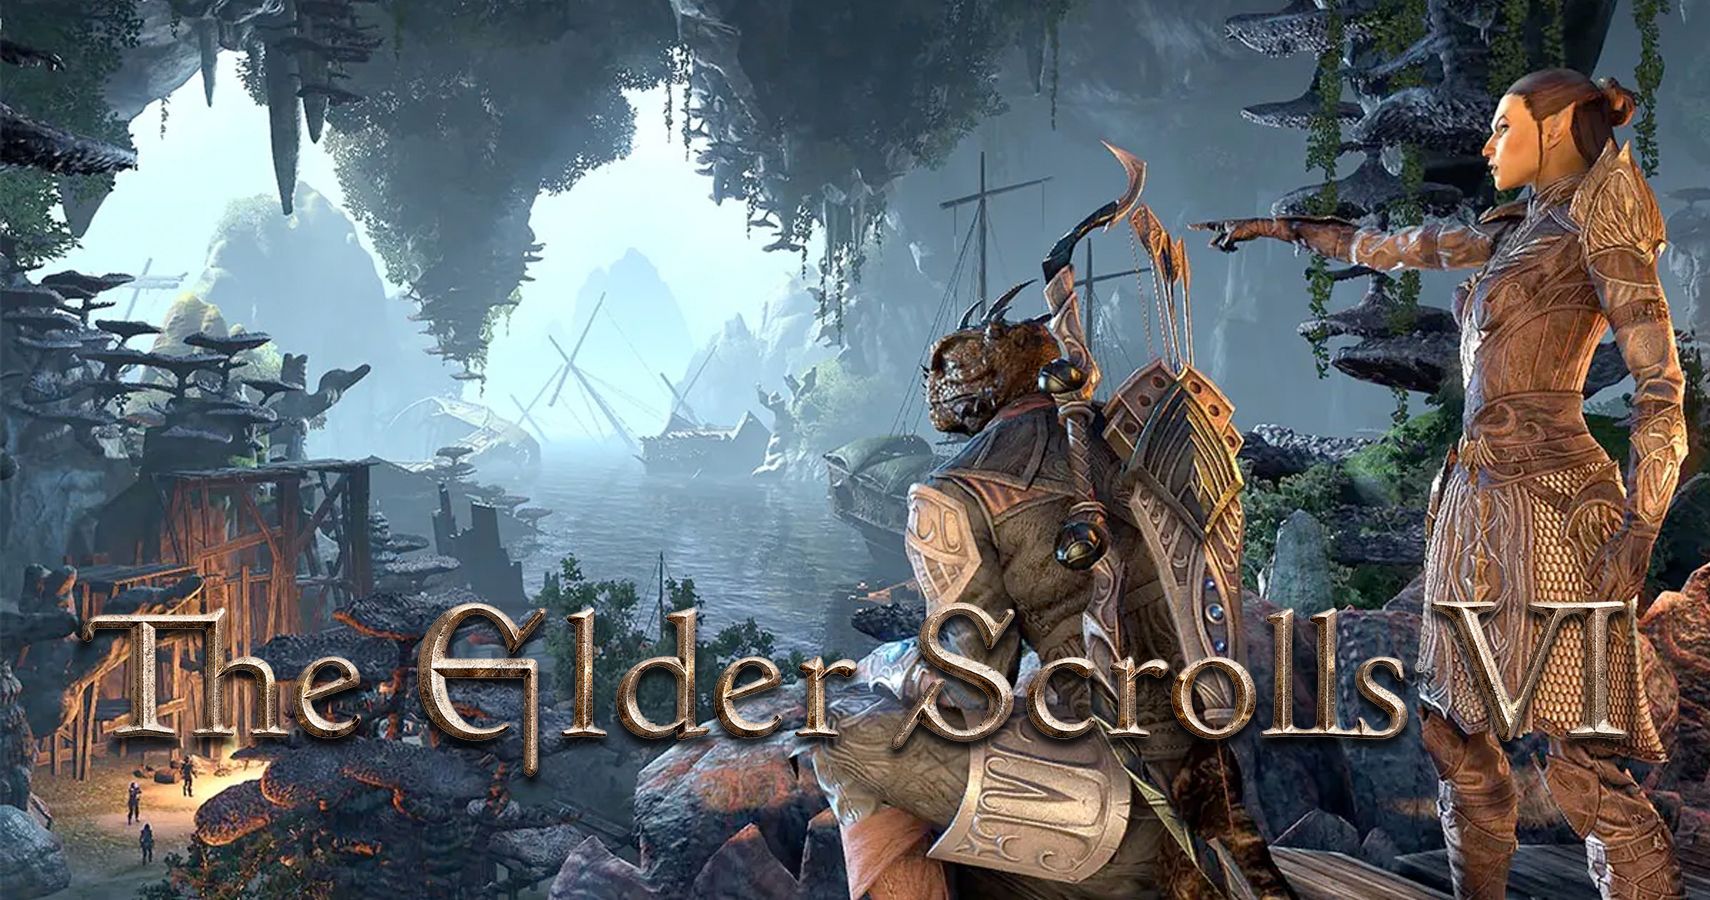 The Elder Scrolls 6 officially announced by Bethesda at E3 2018